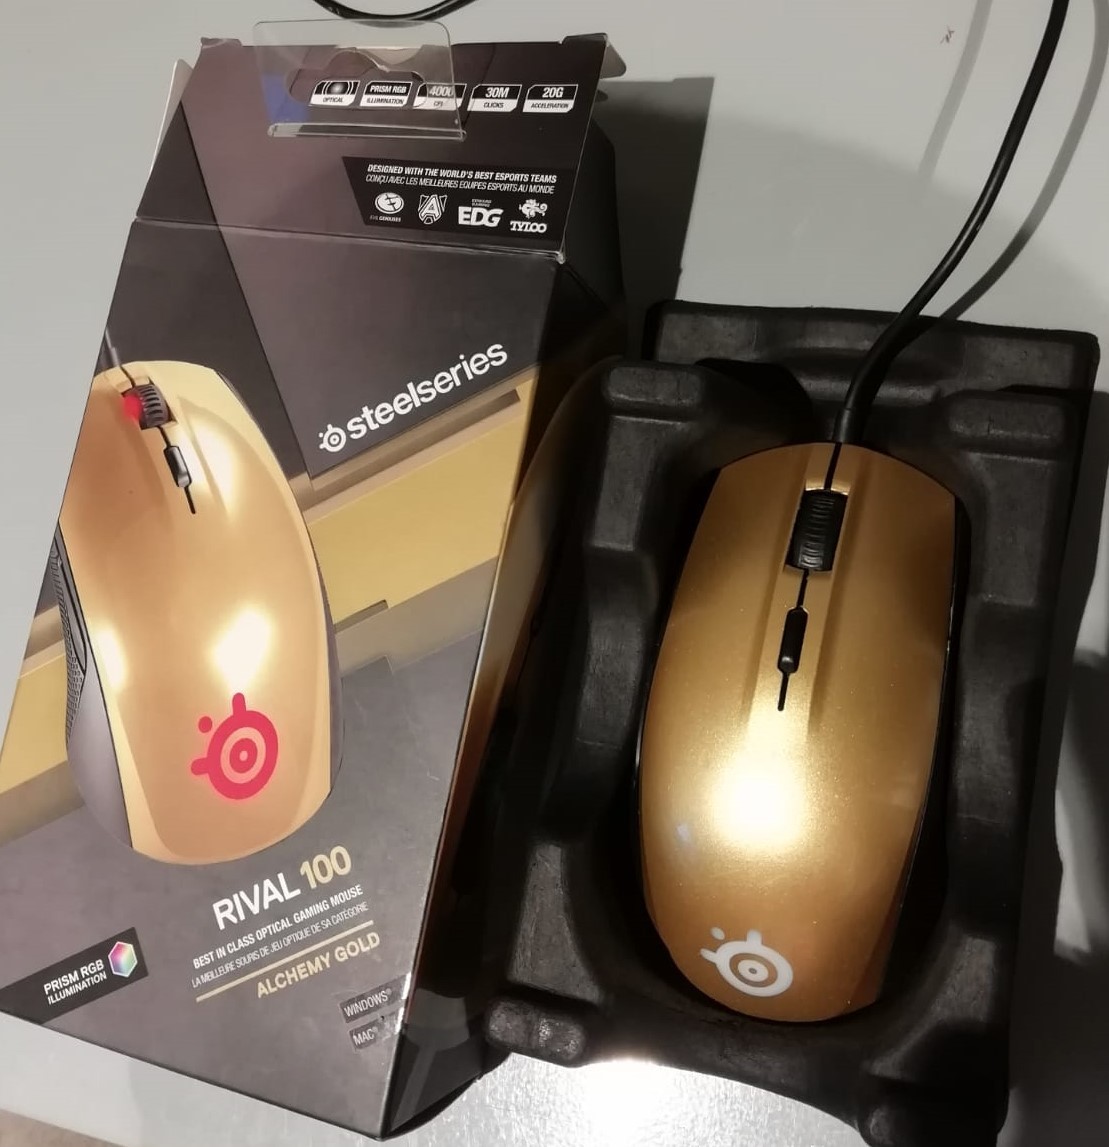 100 TL / Steelseries Rival 100 Mouse & Steelseries Qck Mousepad